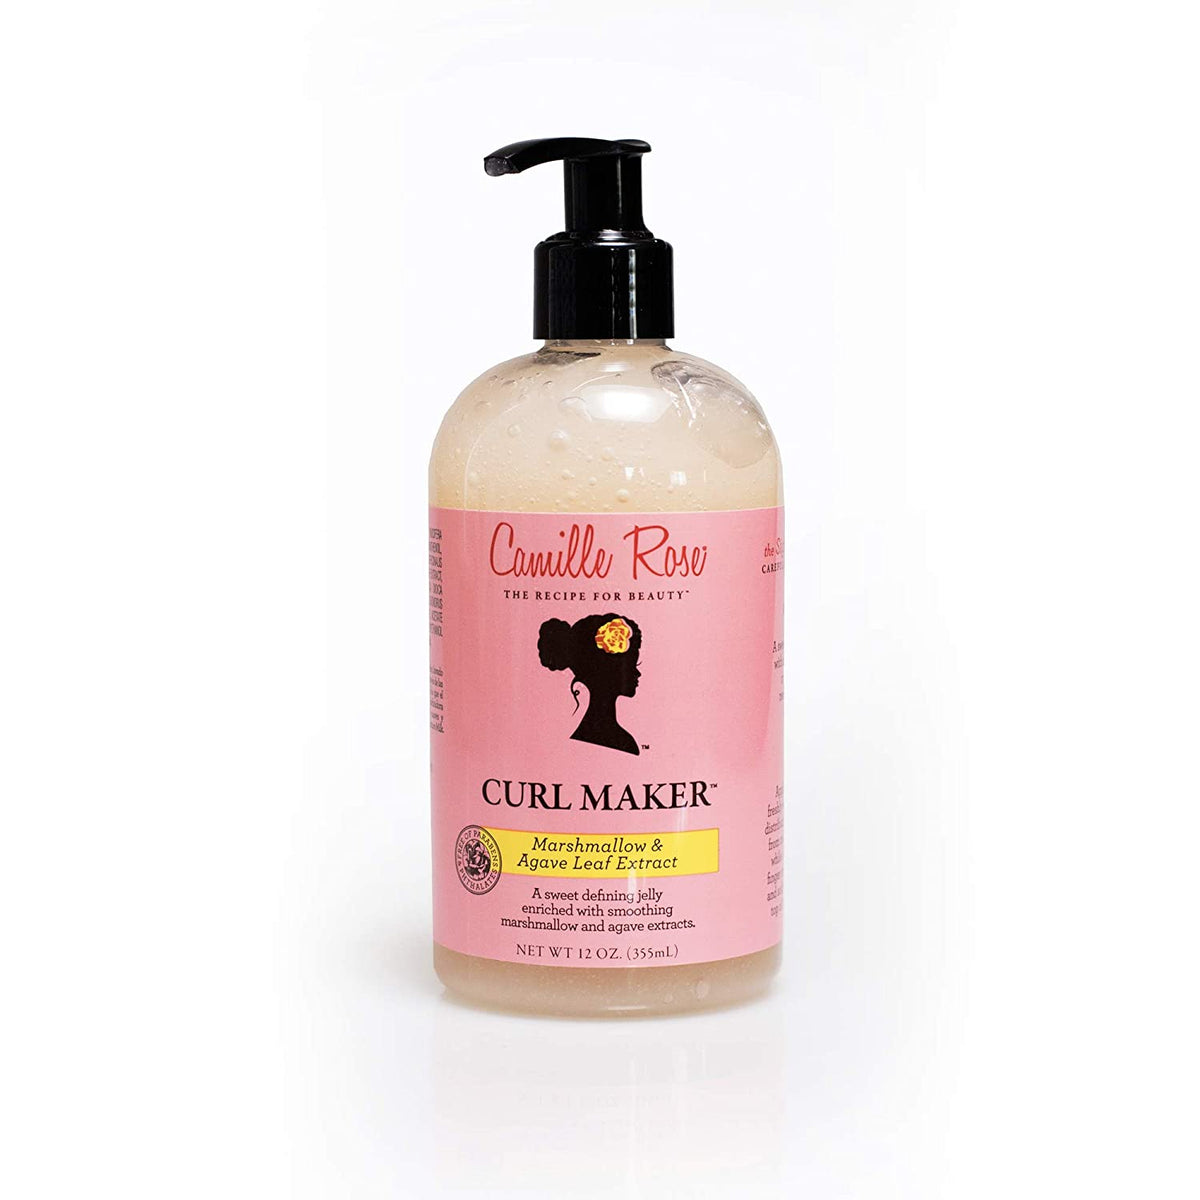 Camille Rose Curl Maker, Marshmallow & Agave Leaf Extract, 12oz